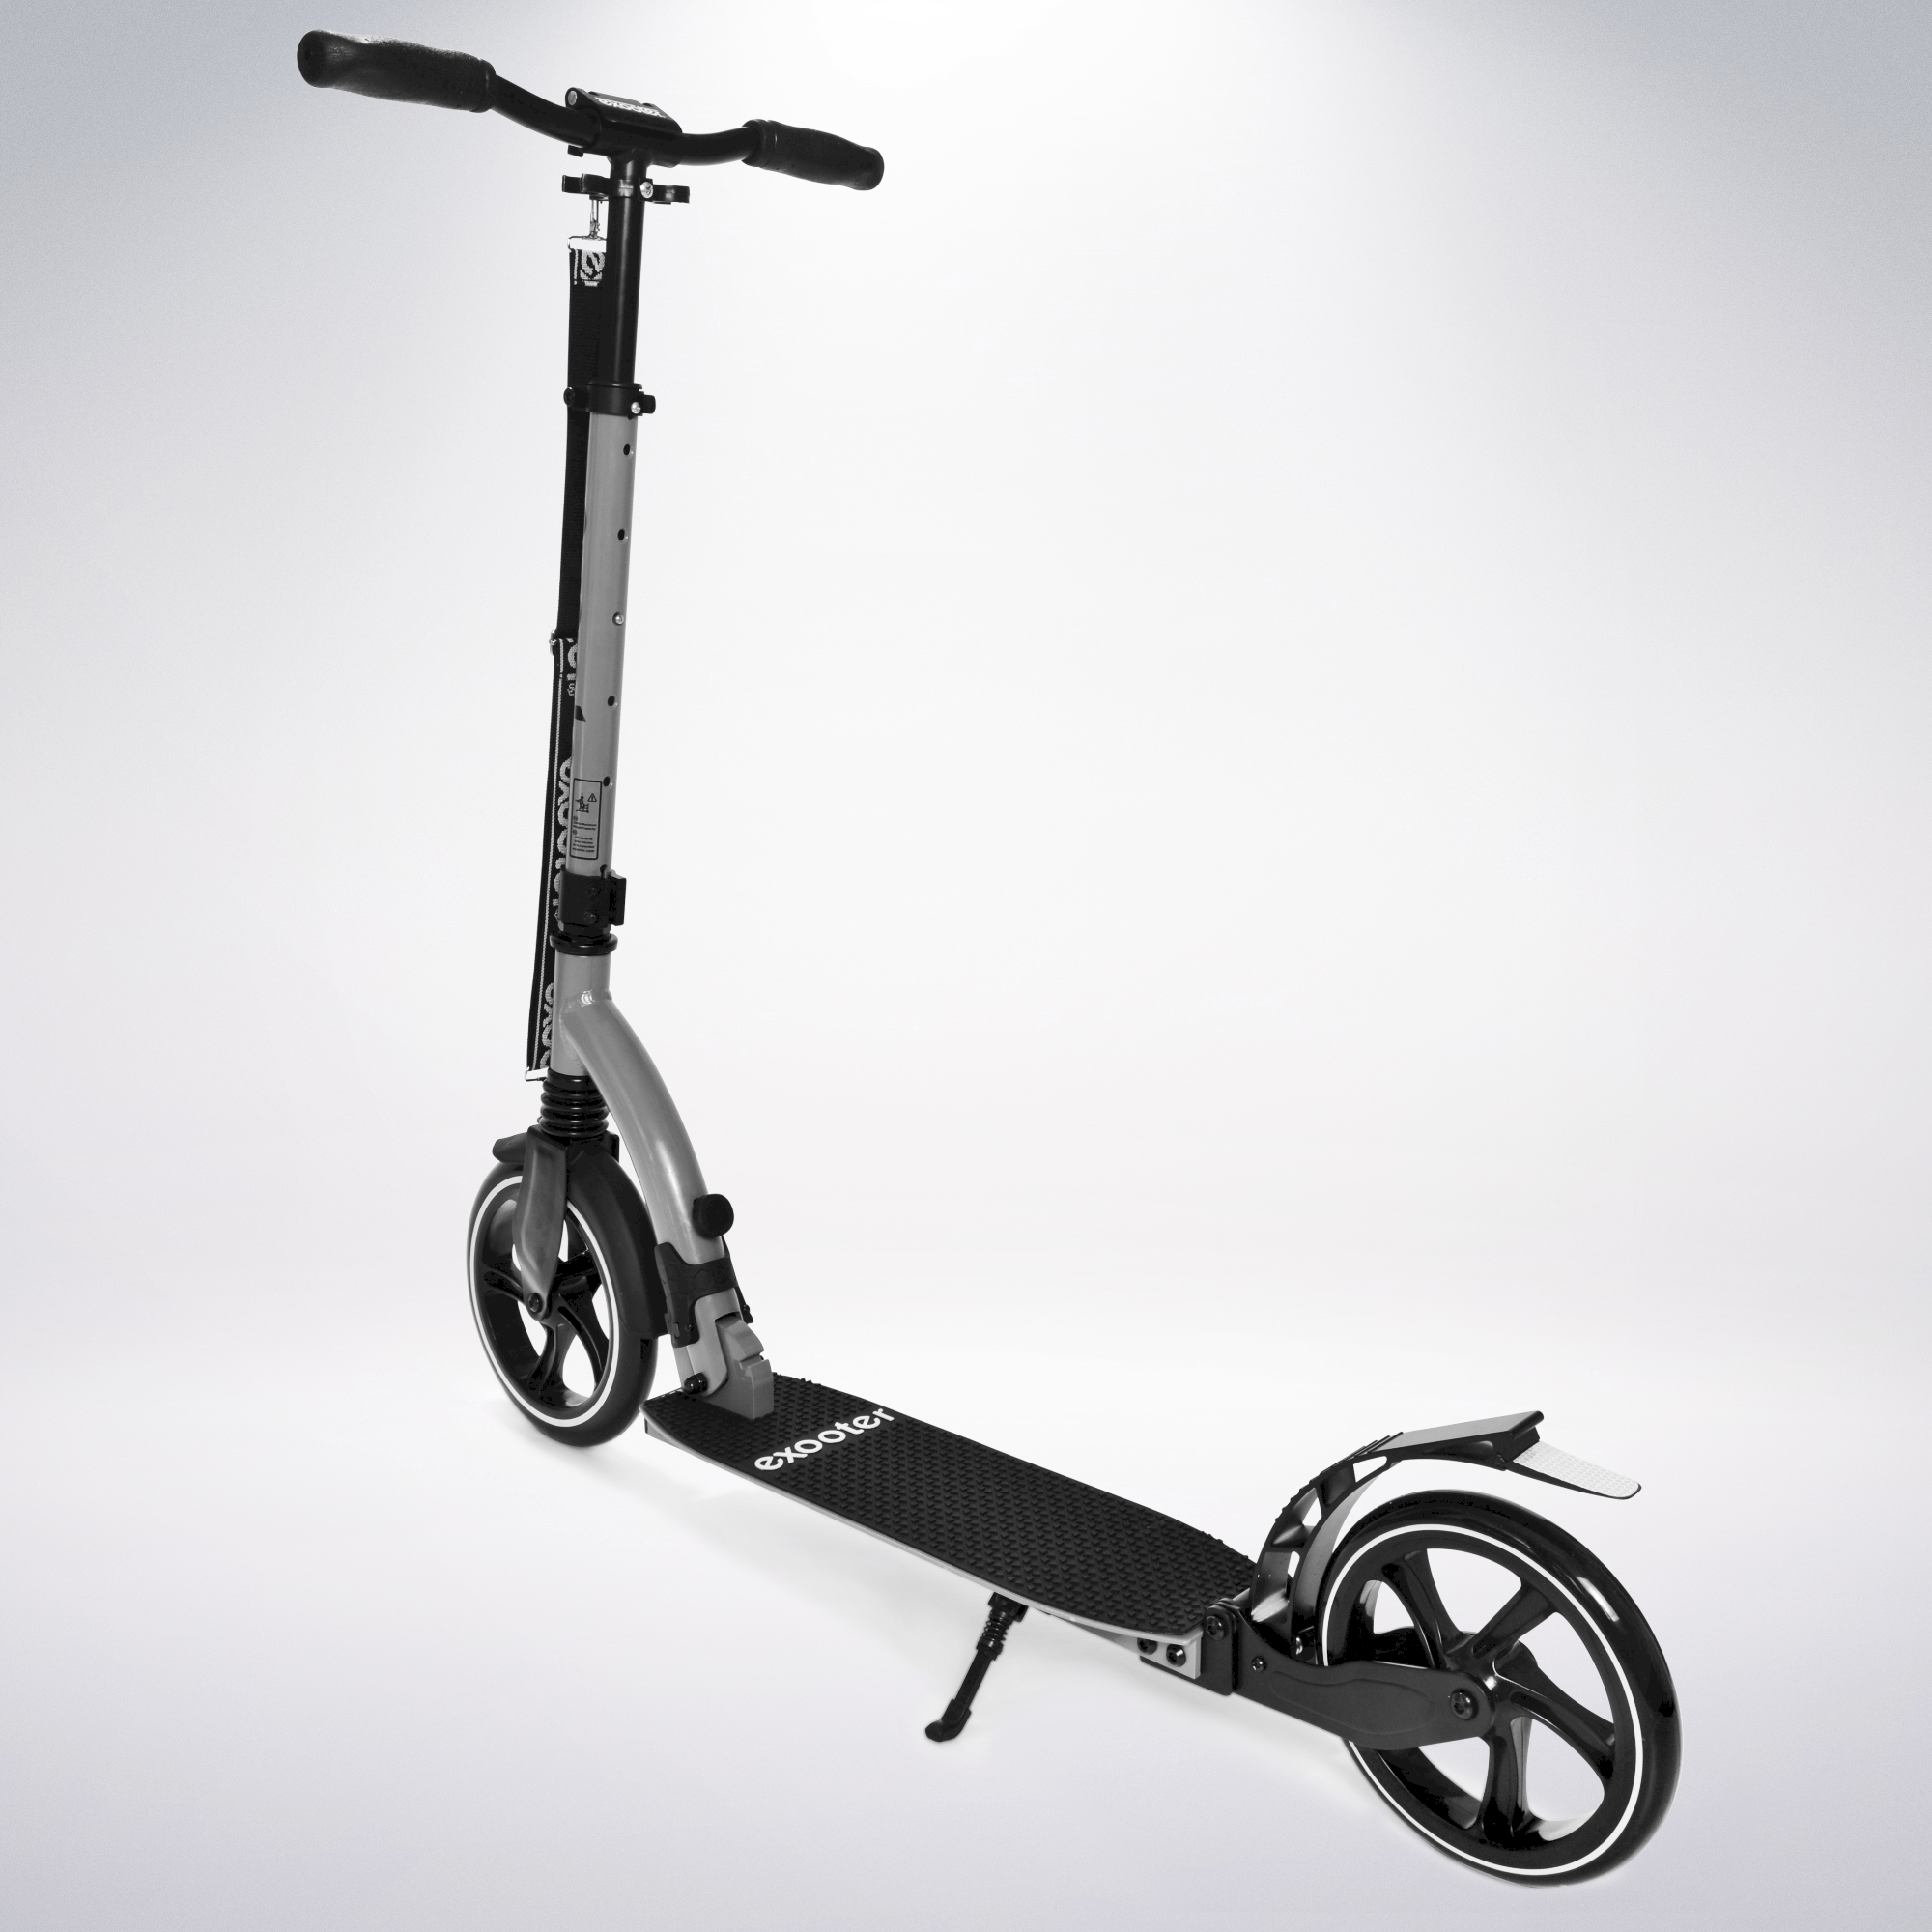 Manual Kick With In Dual Shocks EXOOTER Adult Scooter M1950GR